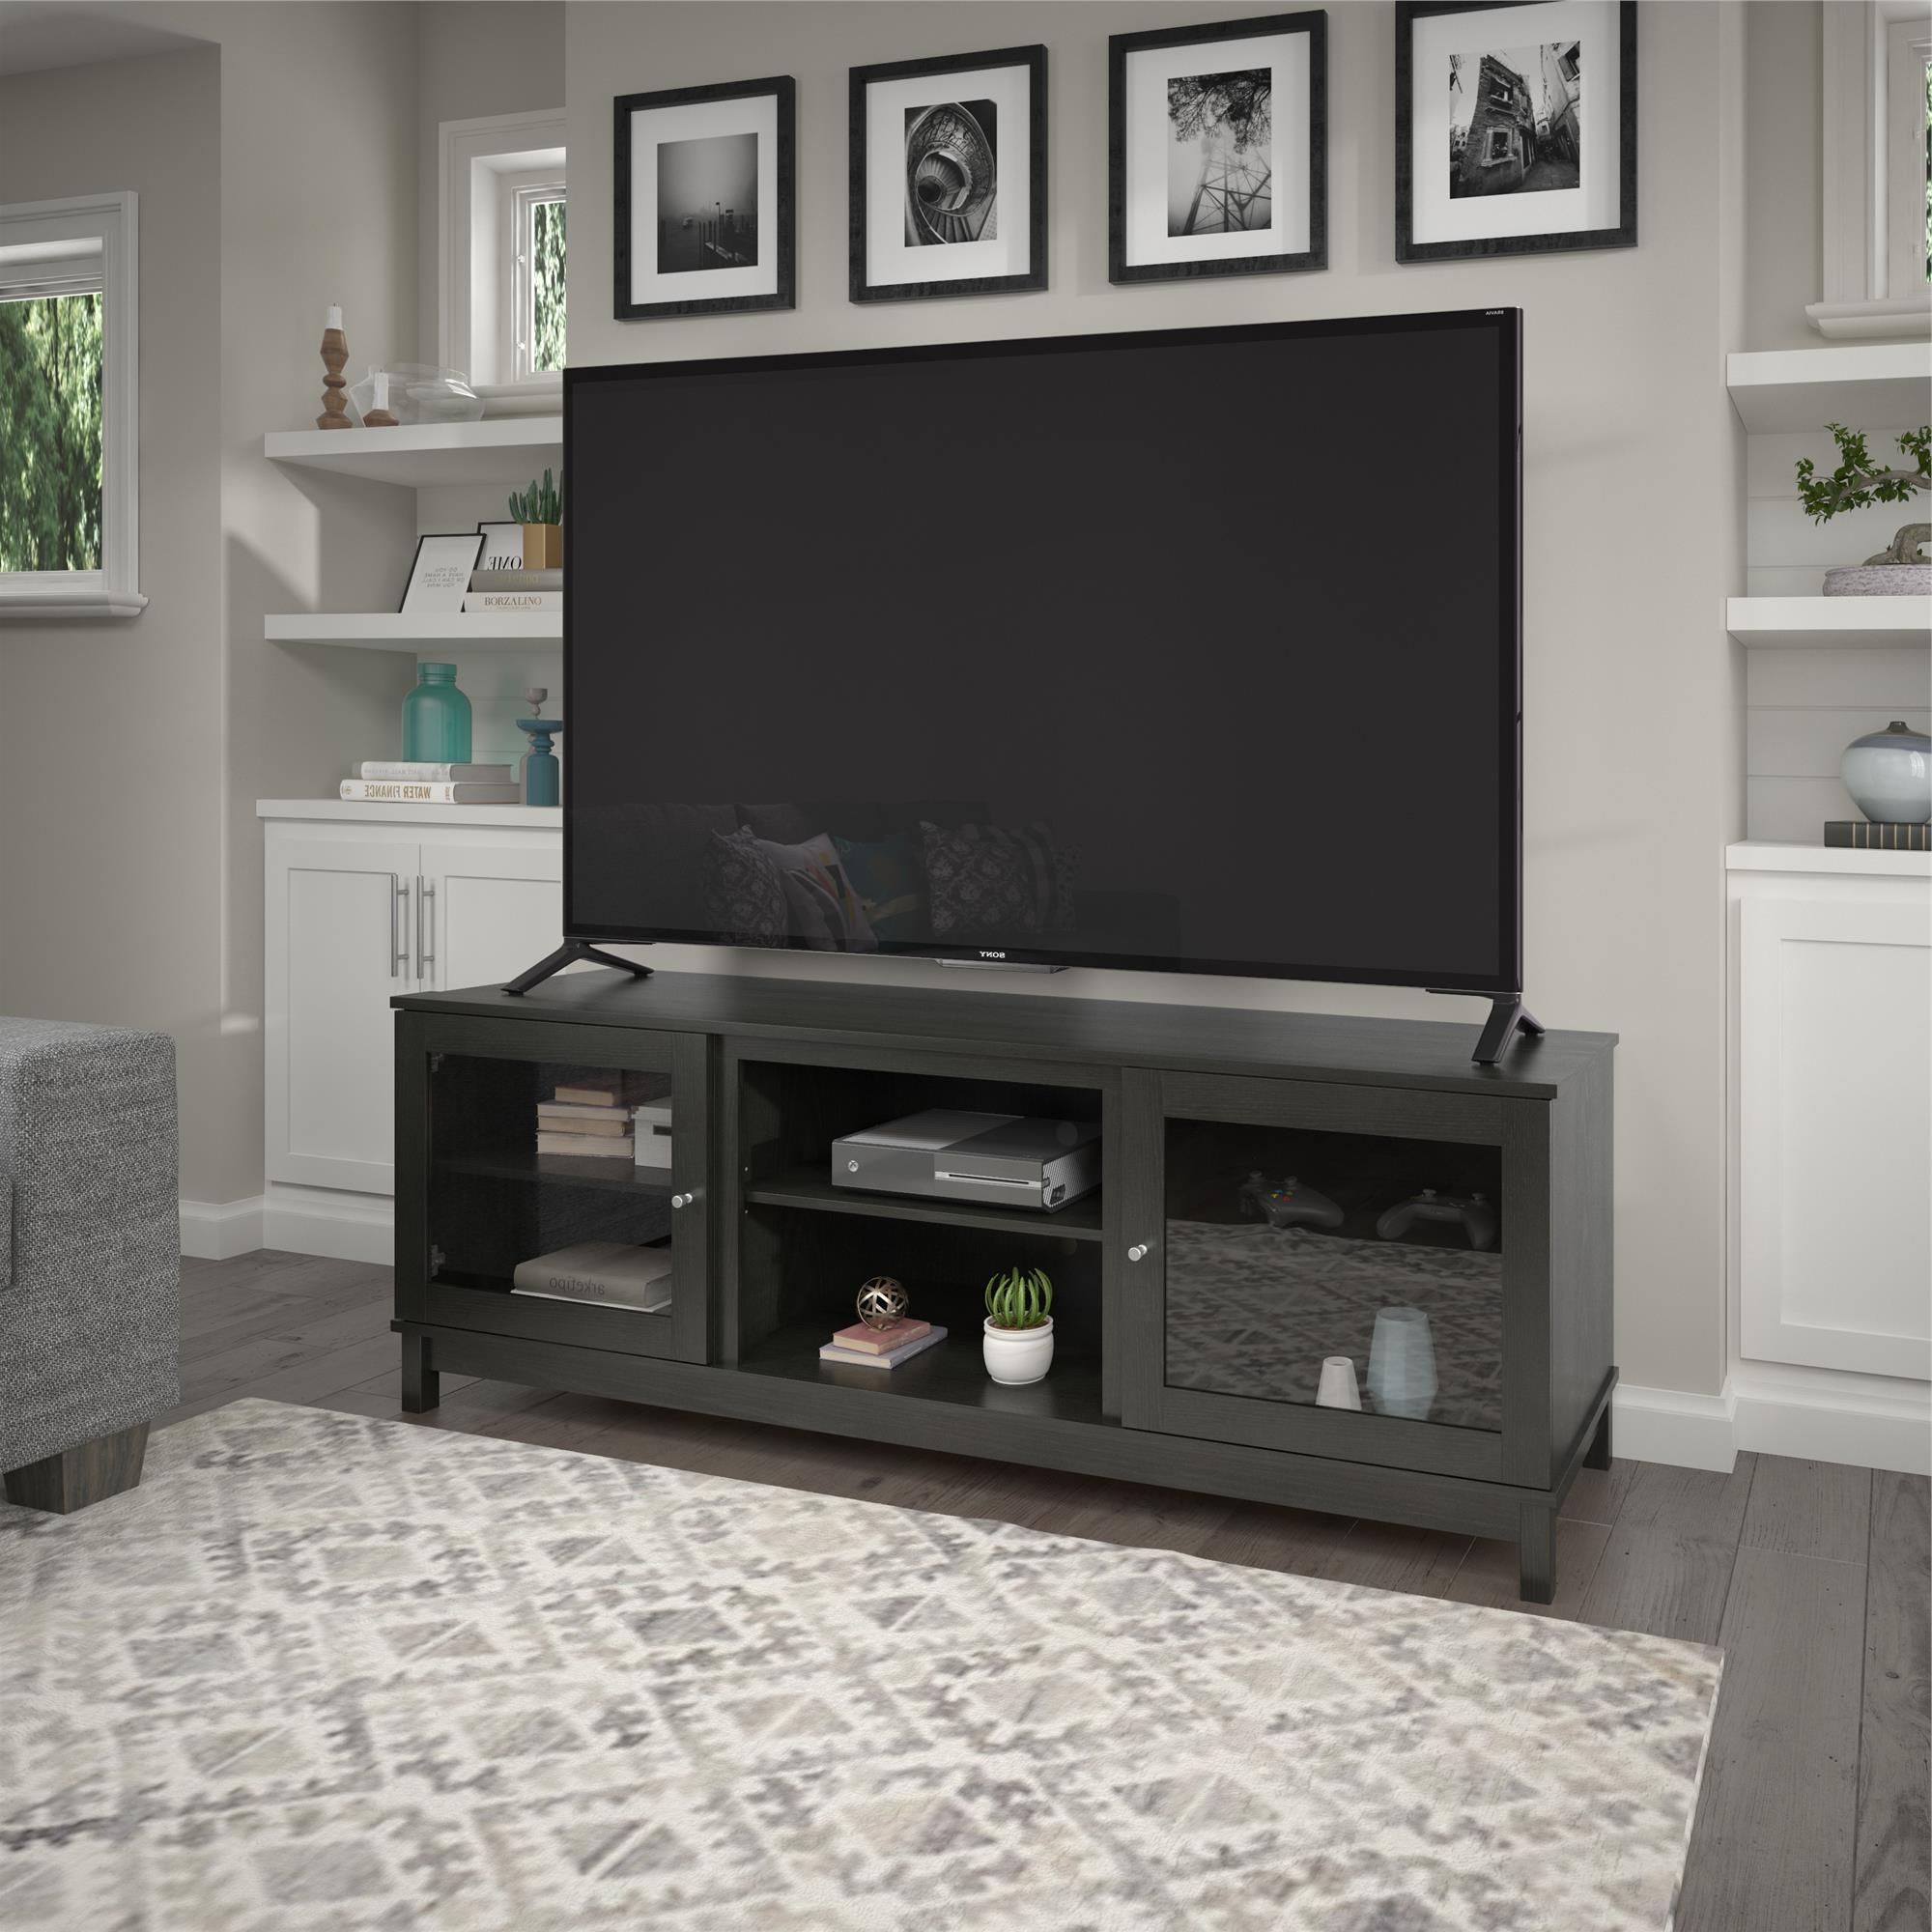 Most Current Lorraine Tv Stands For Tvs Up To 60" With Regard To Ameriwood Home Swanson Tv Stand For Tvs Up To 70", Black (View 1 of 20)